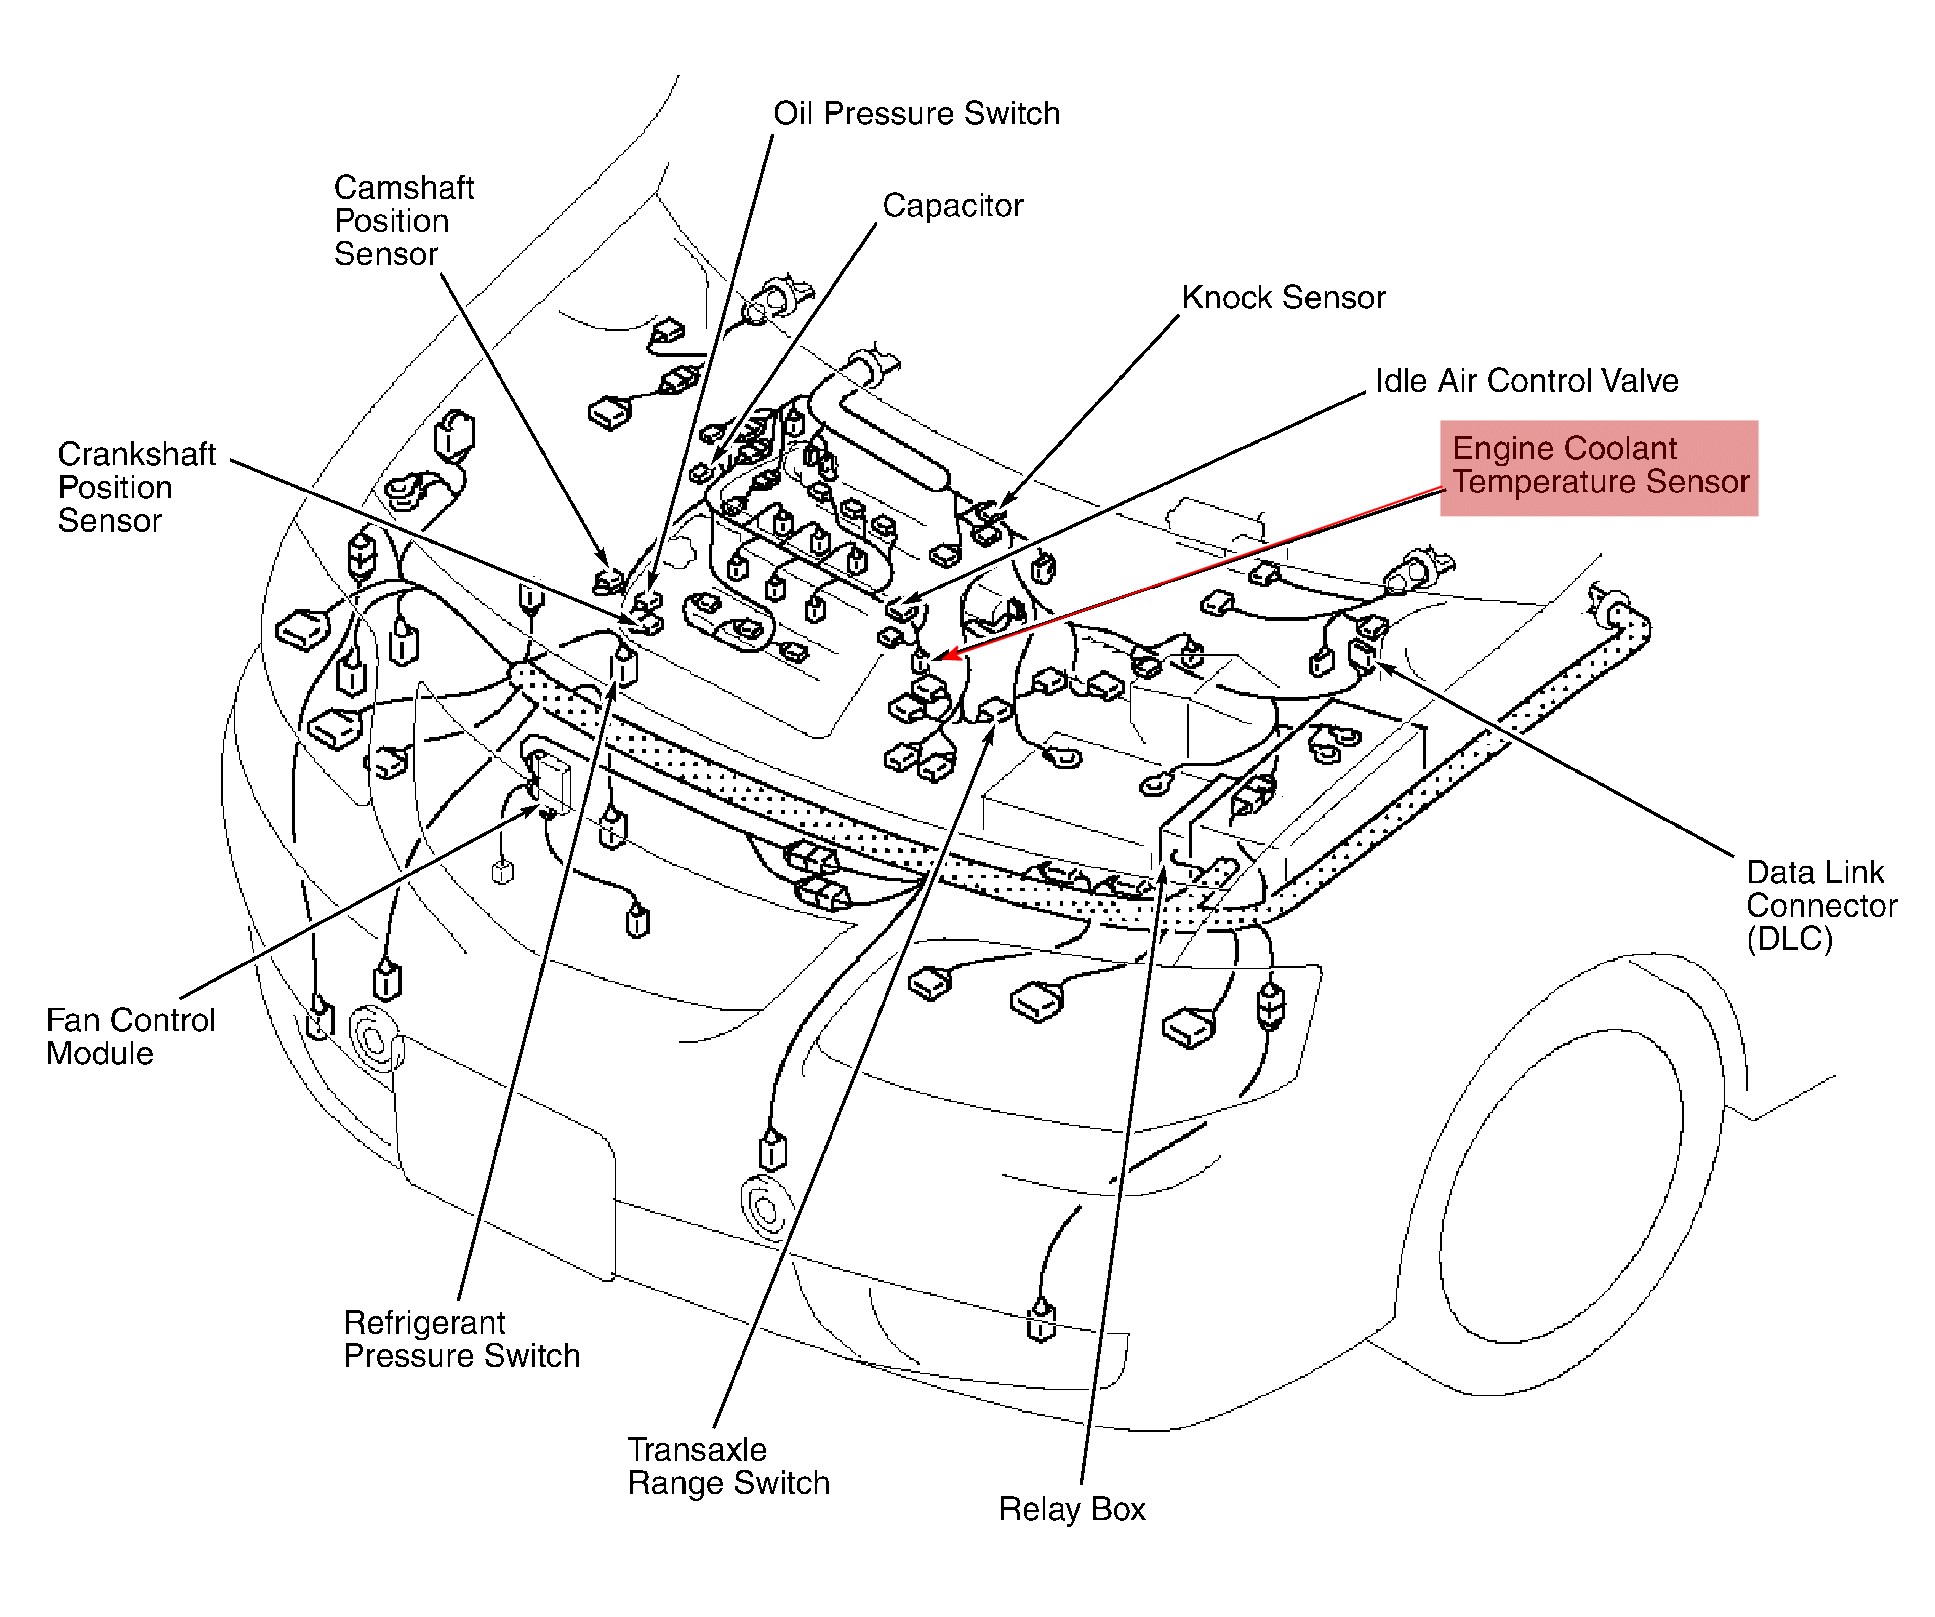 Ford Focus 2001 Engine Diagram ford Focus 1 6 Lx Engine Diagram ford Wiring Diagrams Instructions Of Ford Focus 2001 Engine Diagram